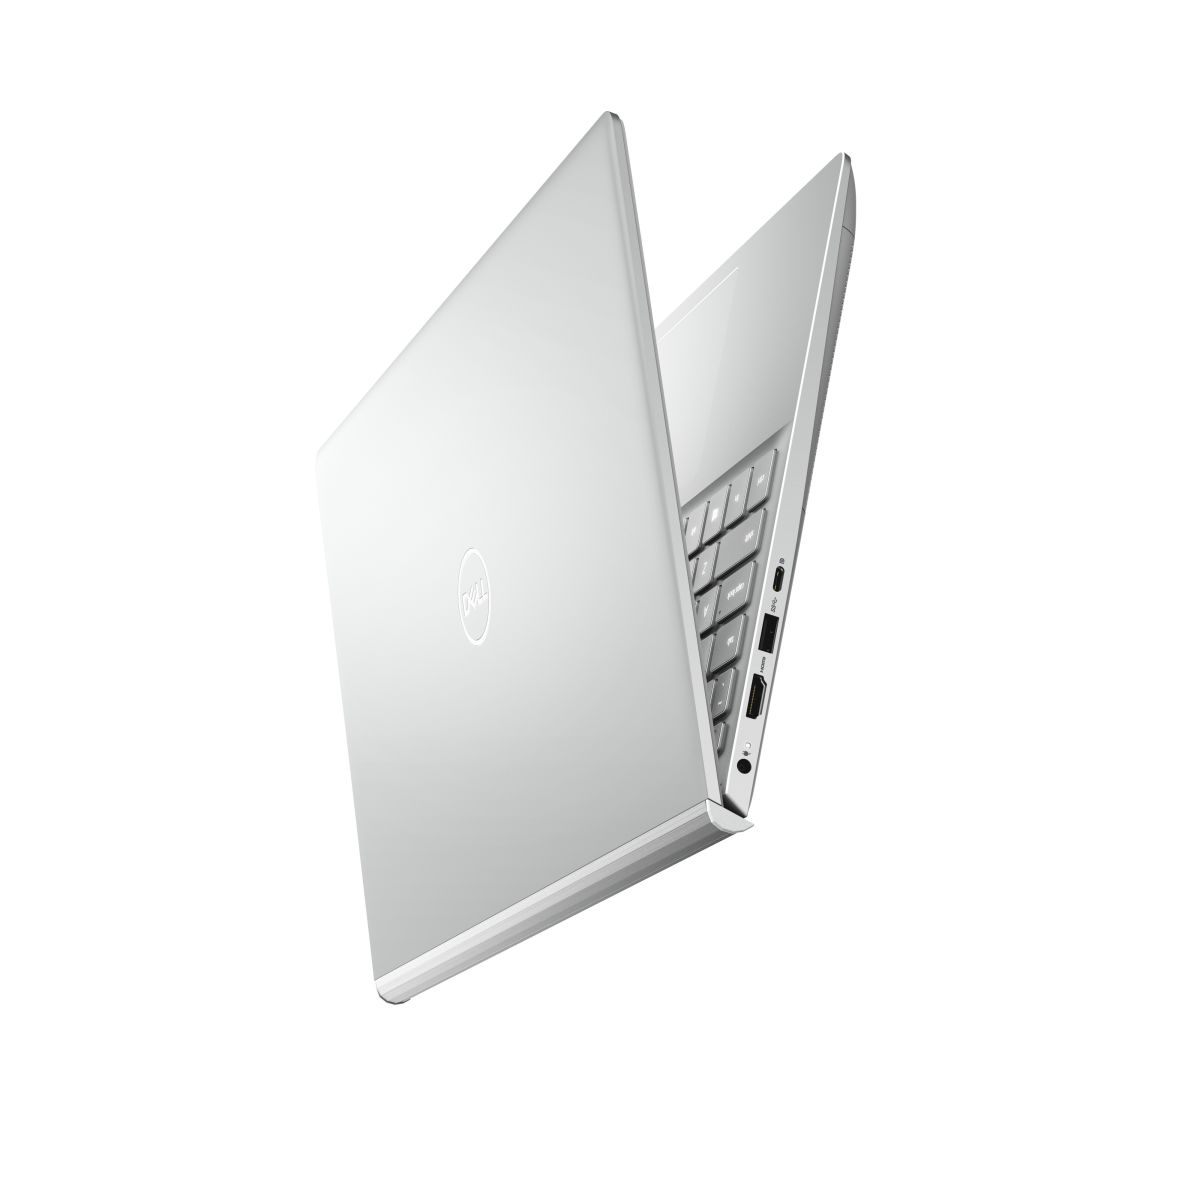  Dell Insprion N7501 - laptop365